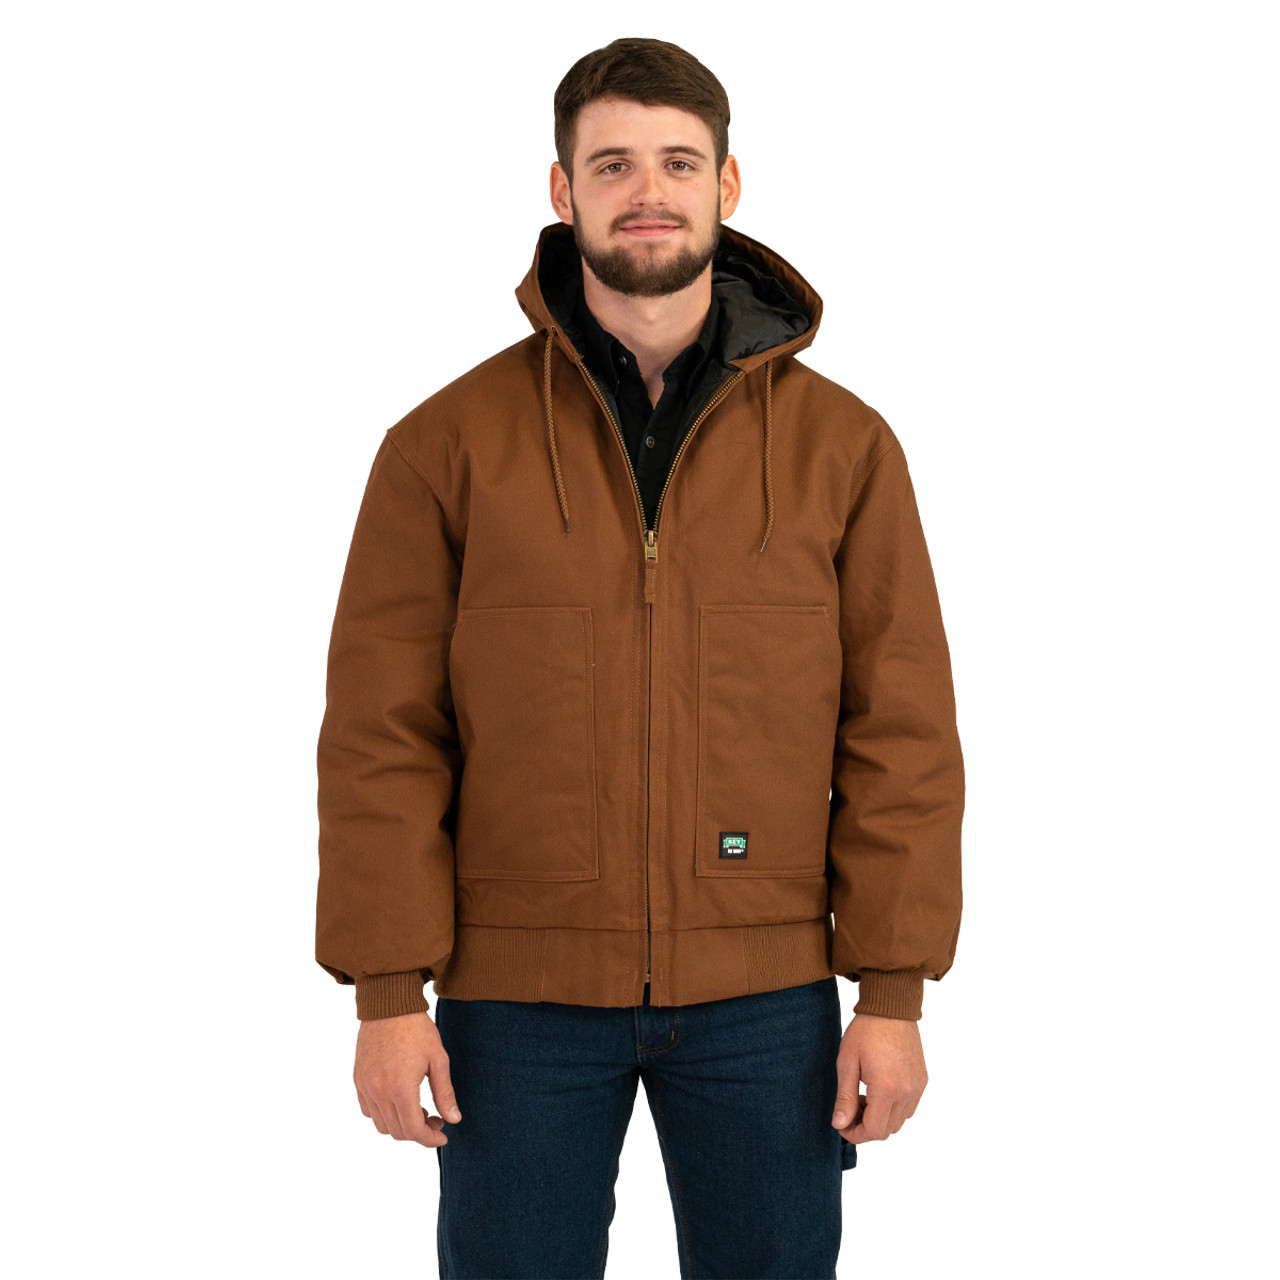 Insulated Duck Hooded Work Jacket for Men - KEY Apparel